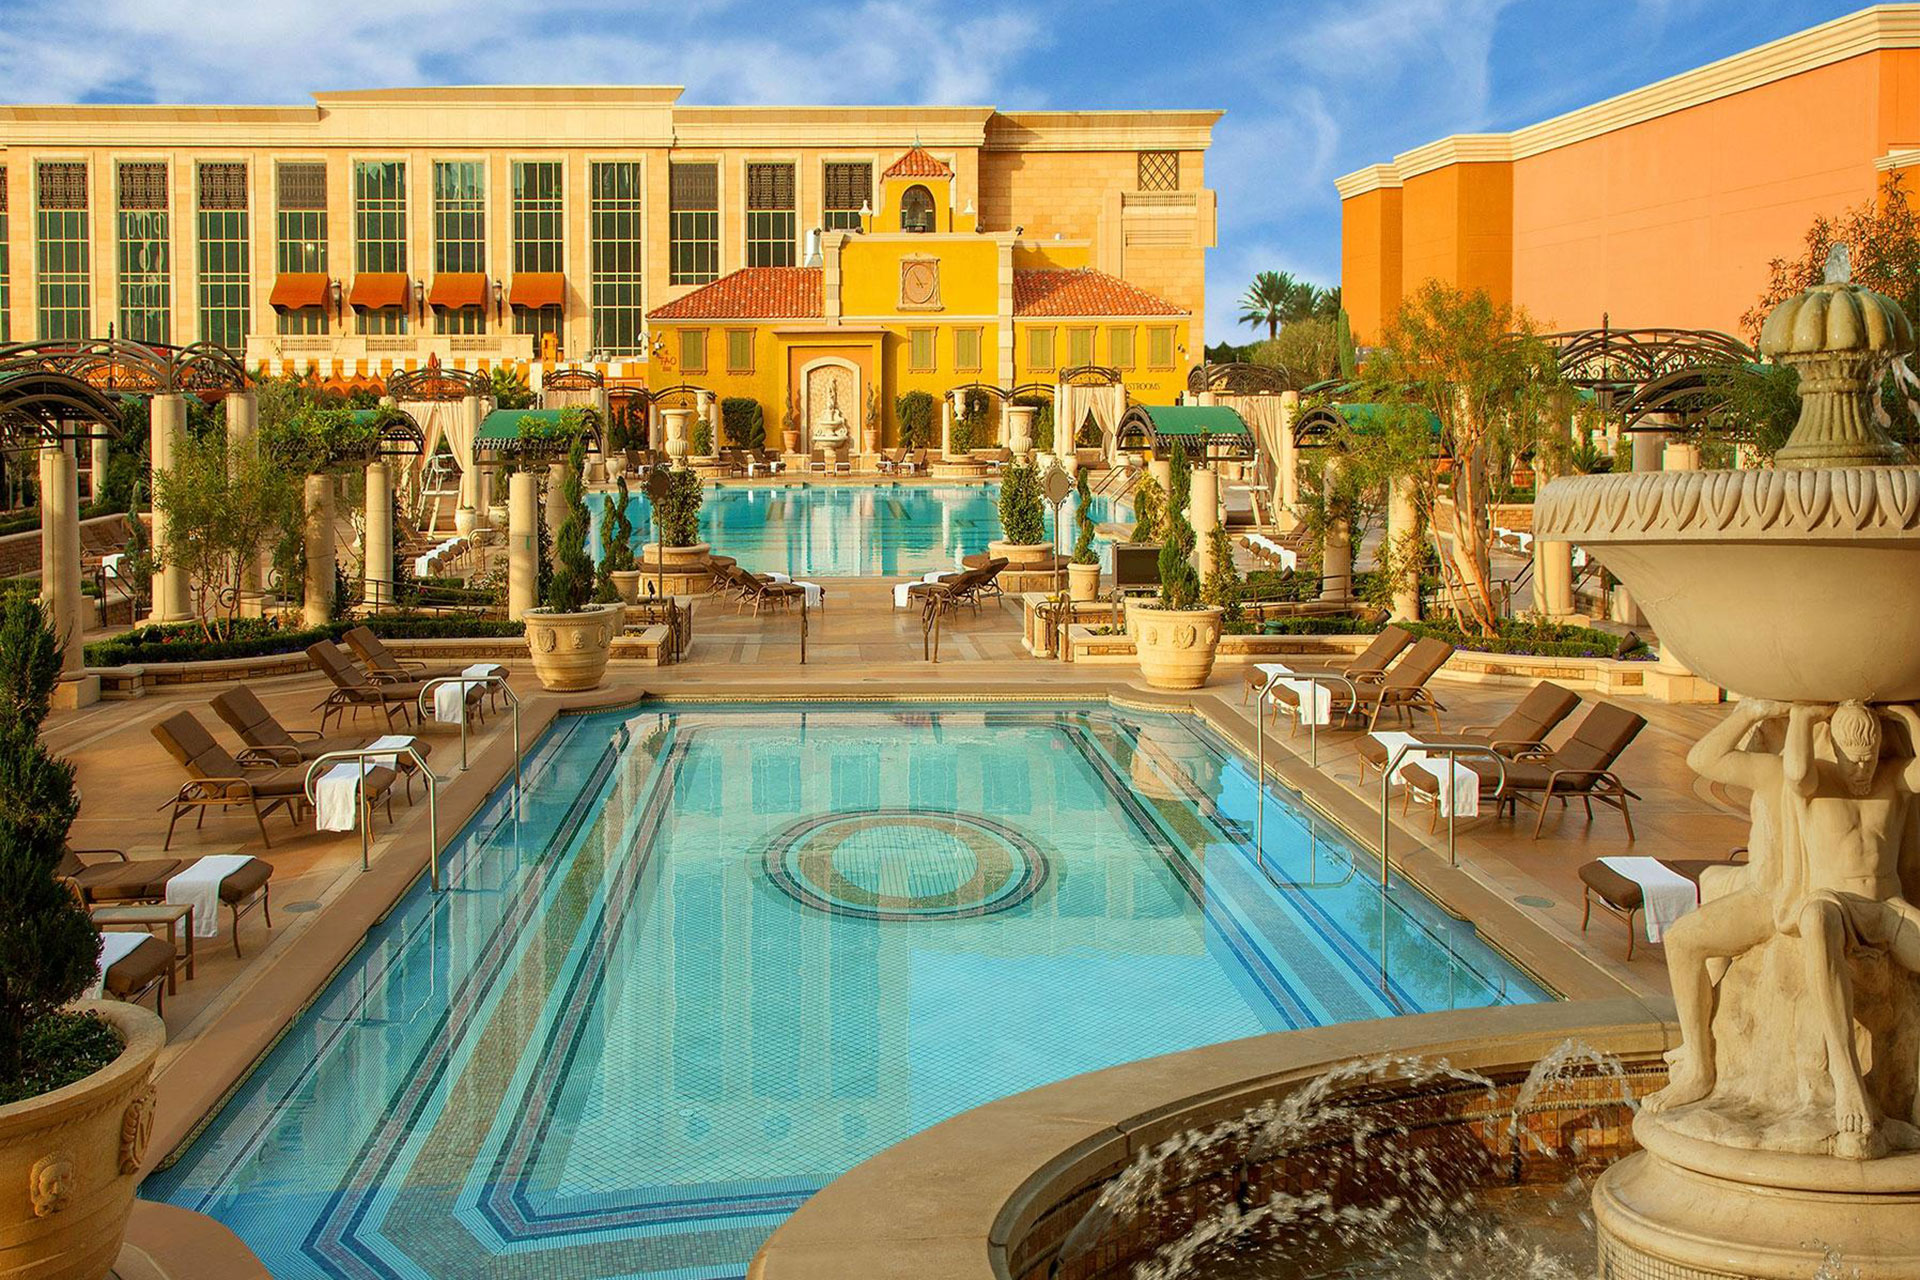 29 Best Family Friendly Hotels to Travel With Kids in Las Vegas